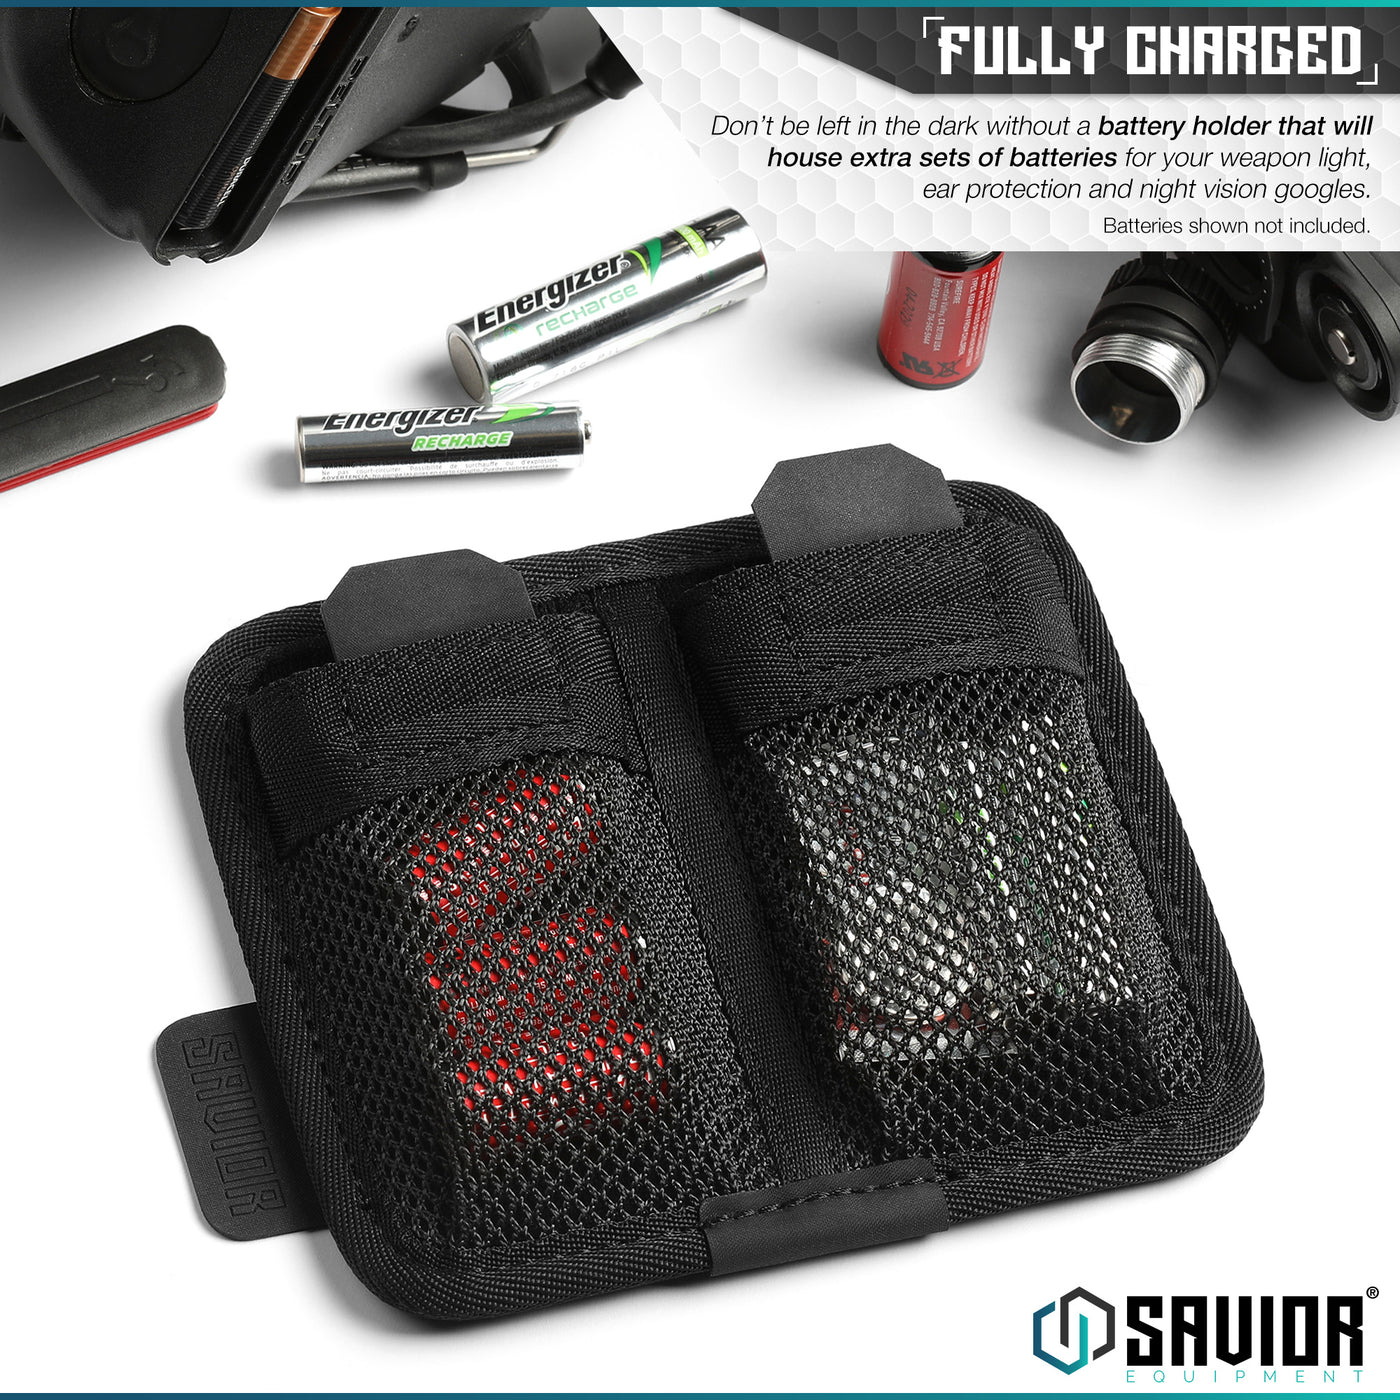 Fully Charged - Don’t be left in the dark without a battery holder that will house extra sets of batteries for your weapon light, ear protection and night vision googles. Batteries shown not included.